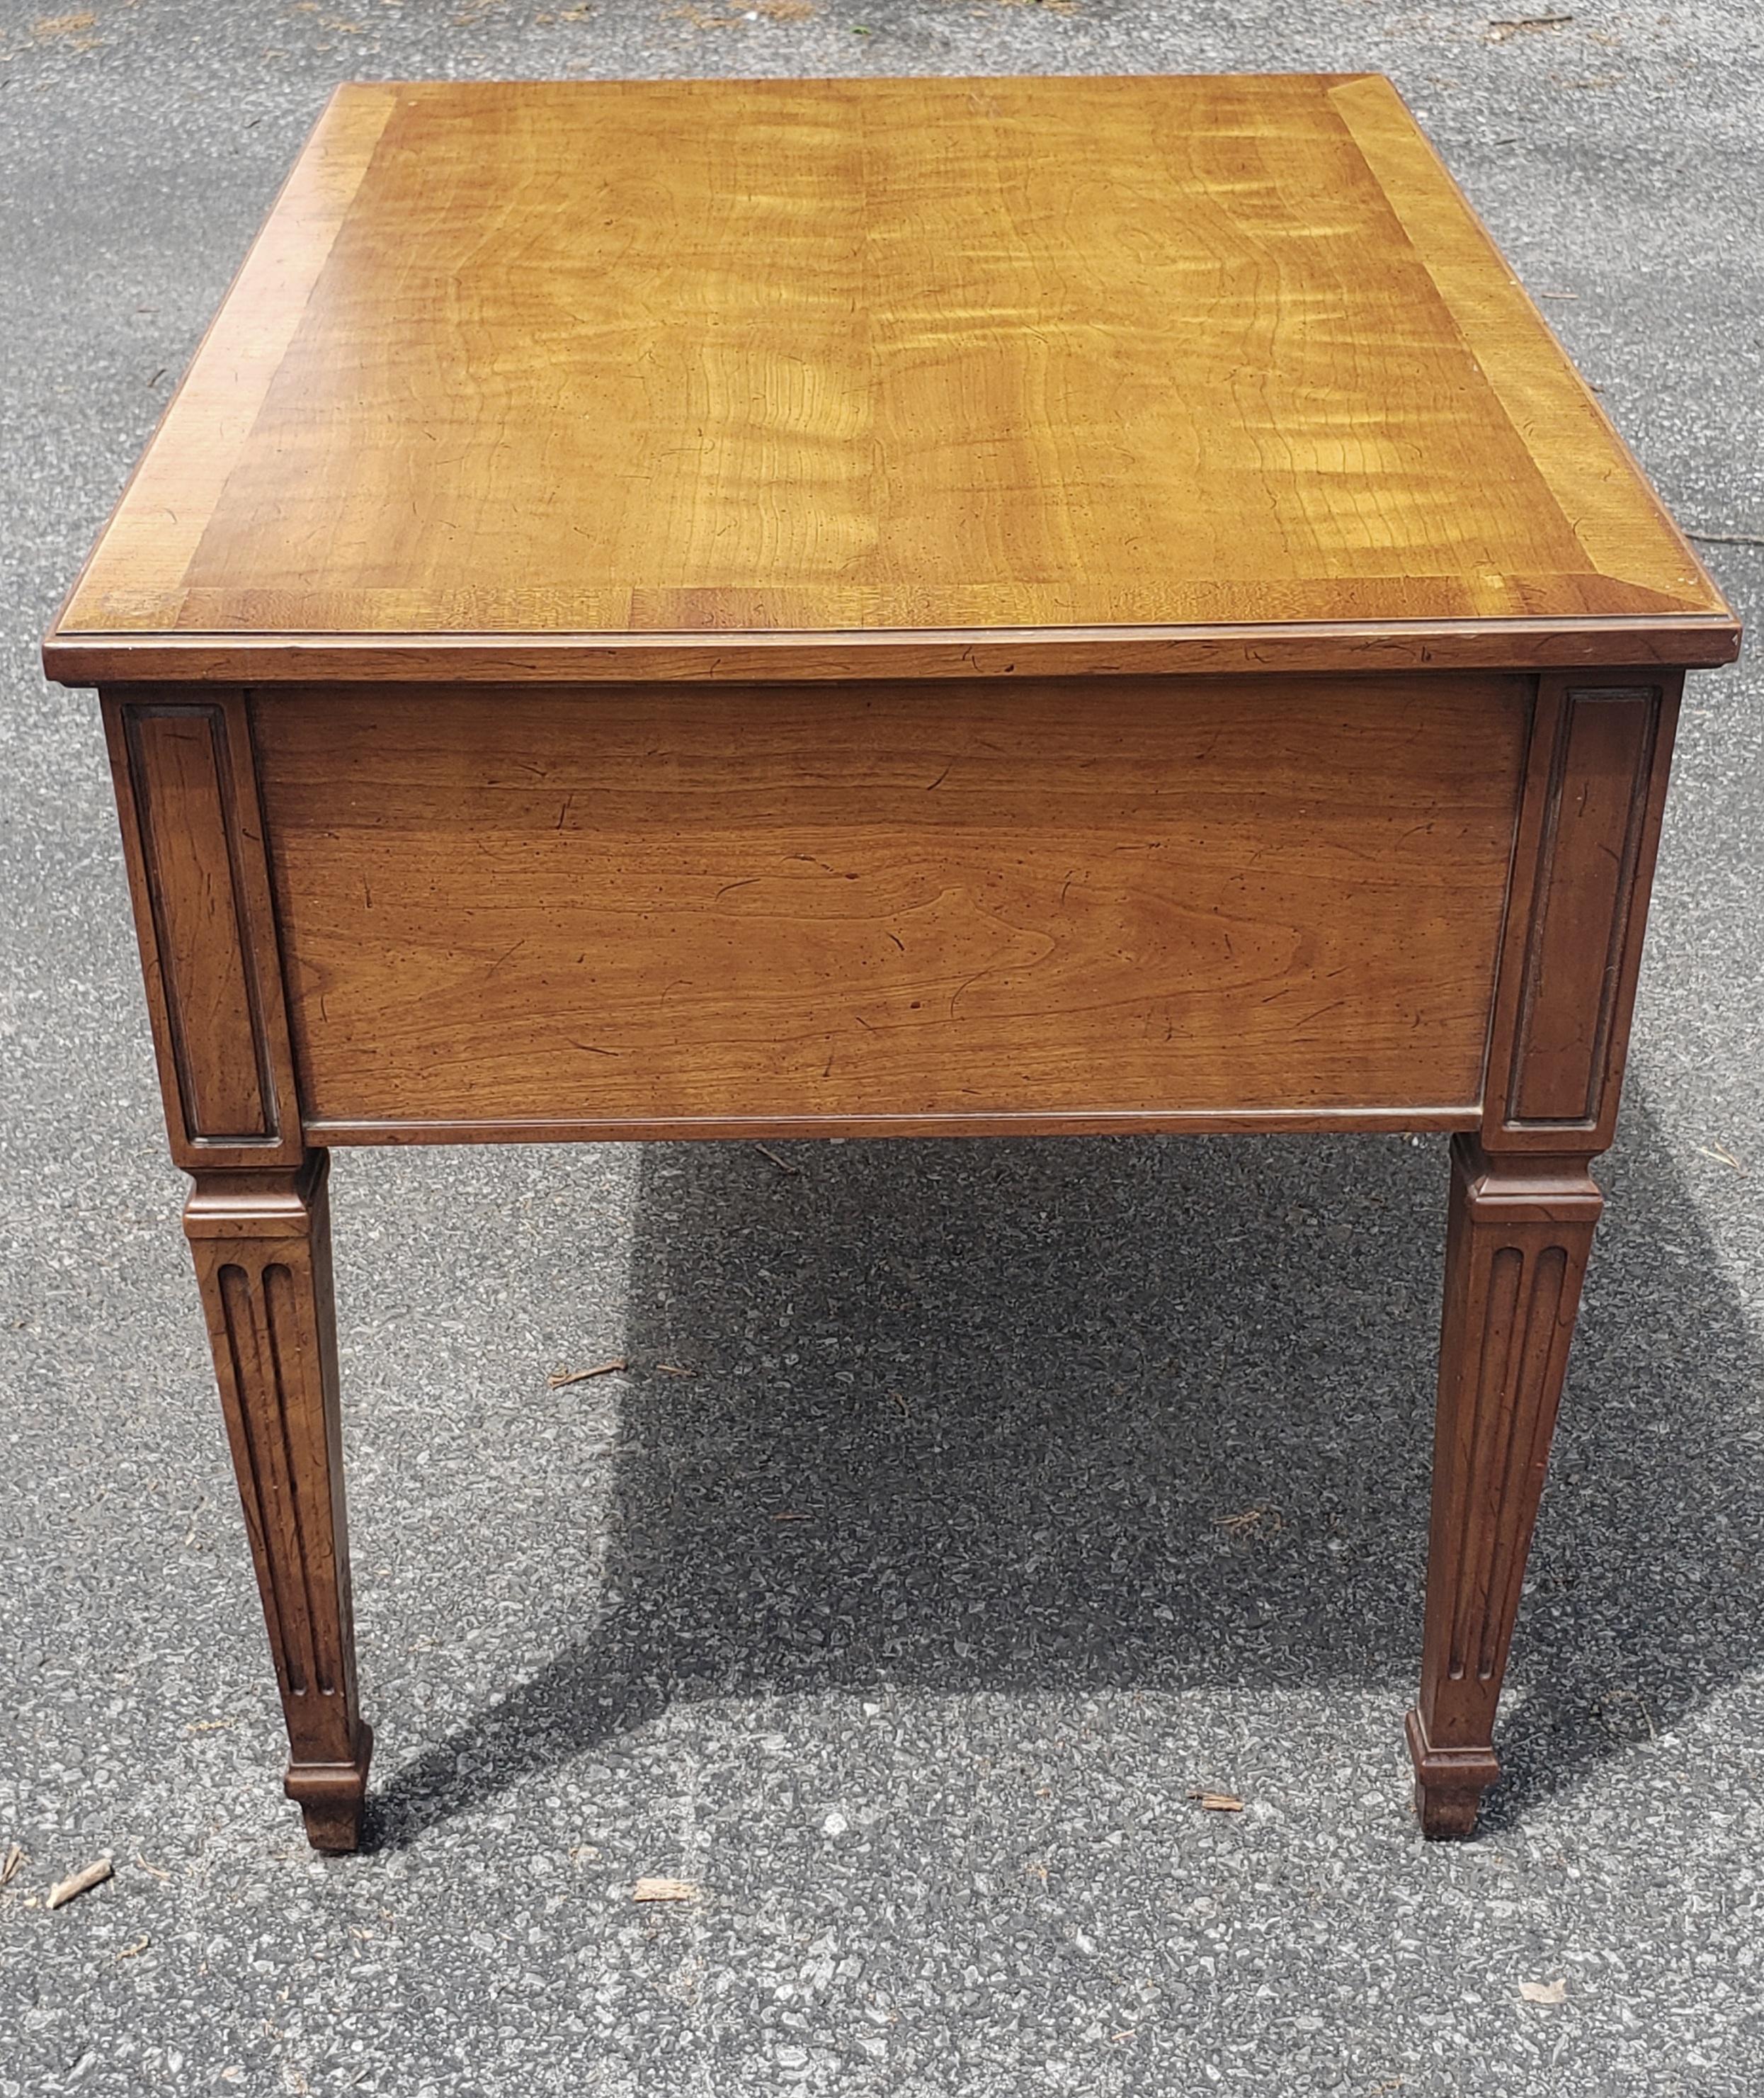 Henredon Midcentury Cross-Banded Walnut Single Drawer Side Table In Good Condition For Sale In Germantown, MD